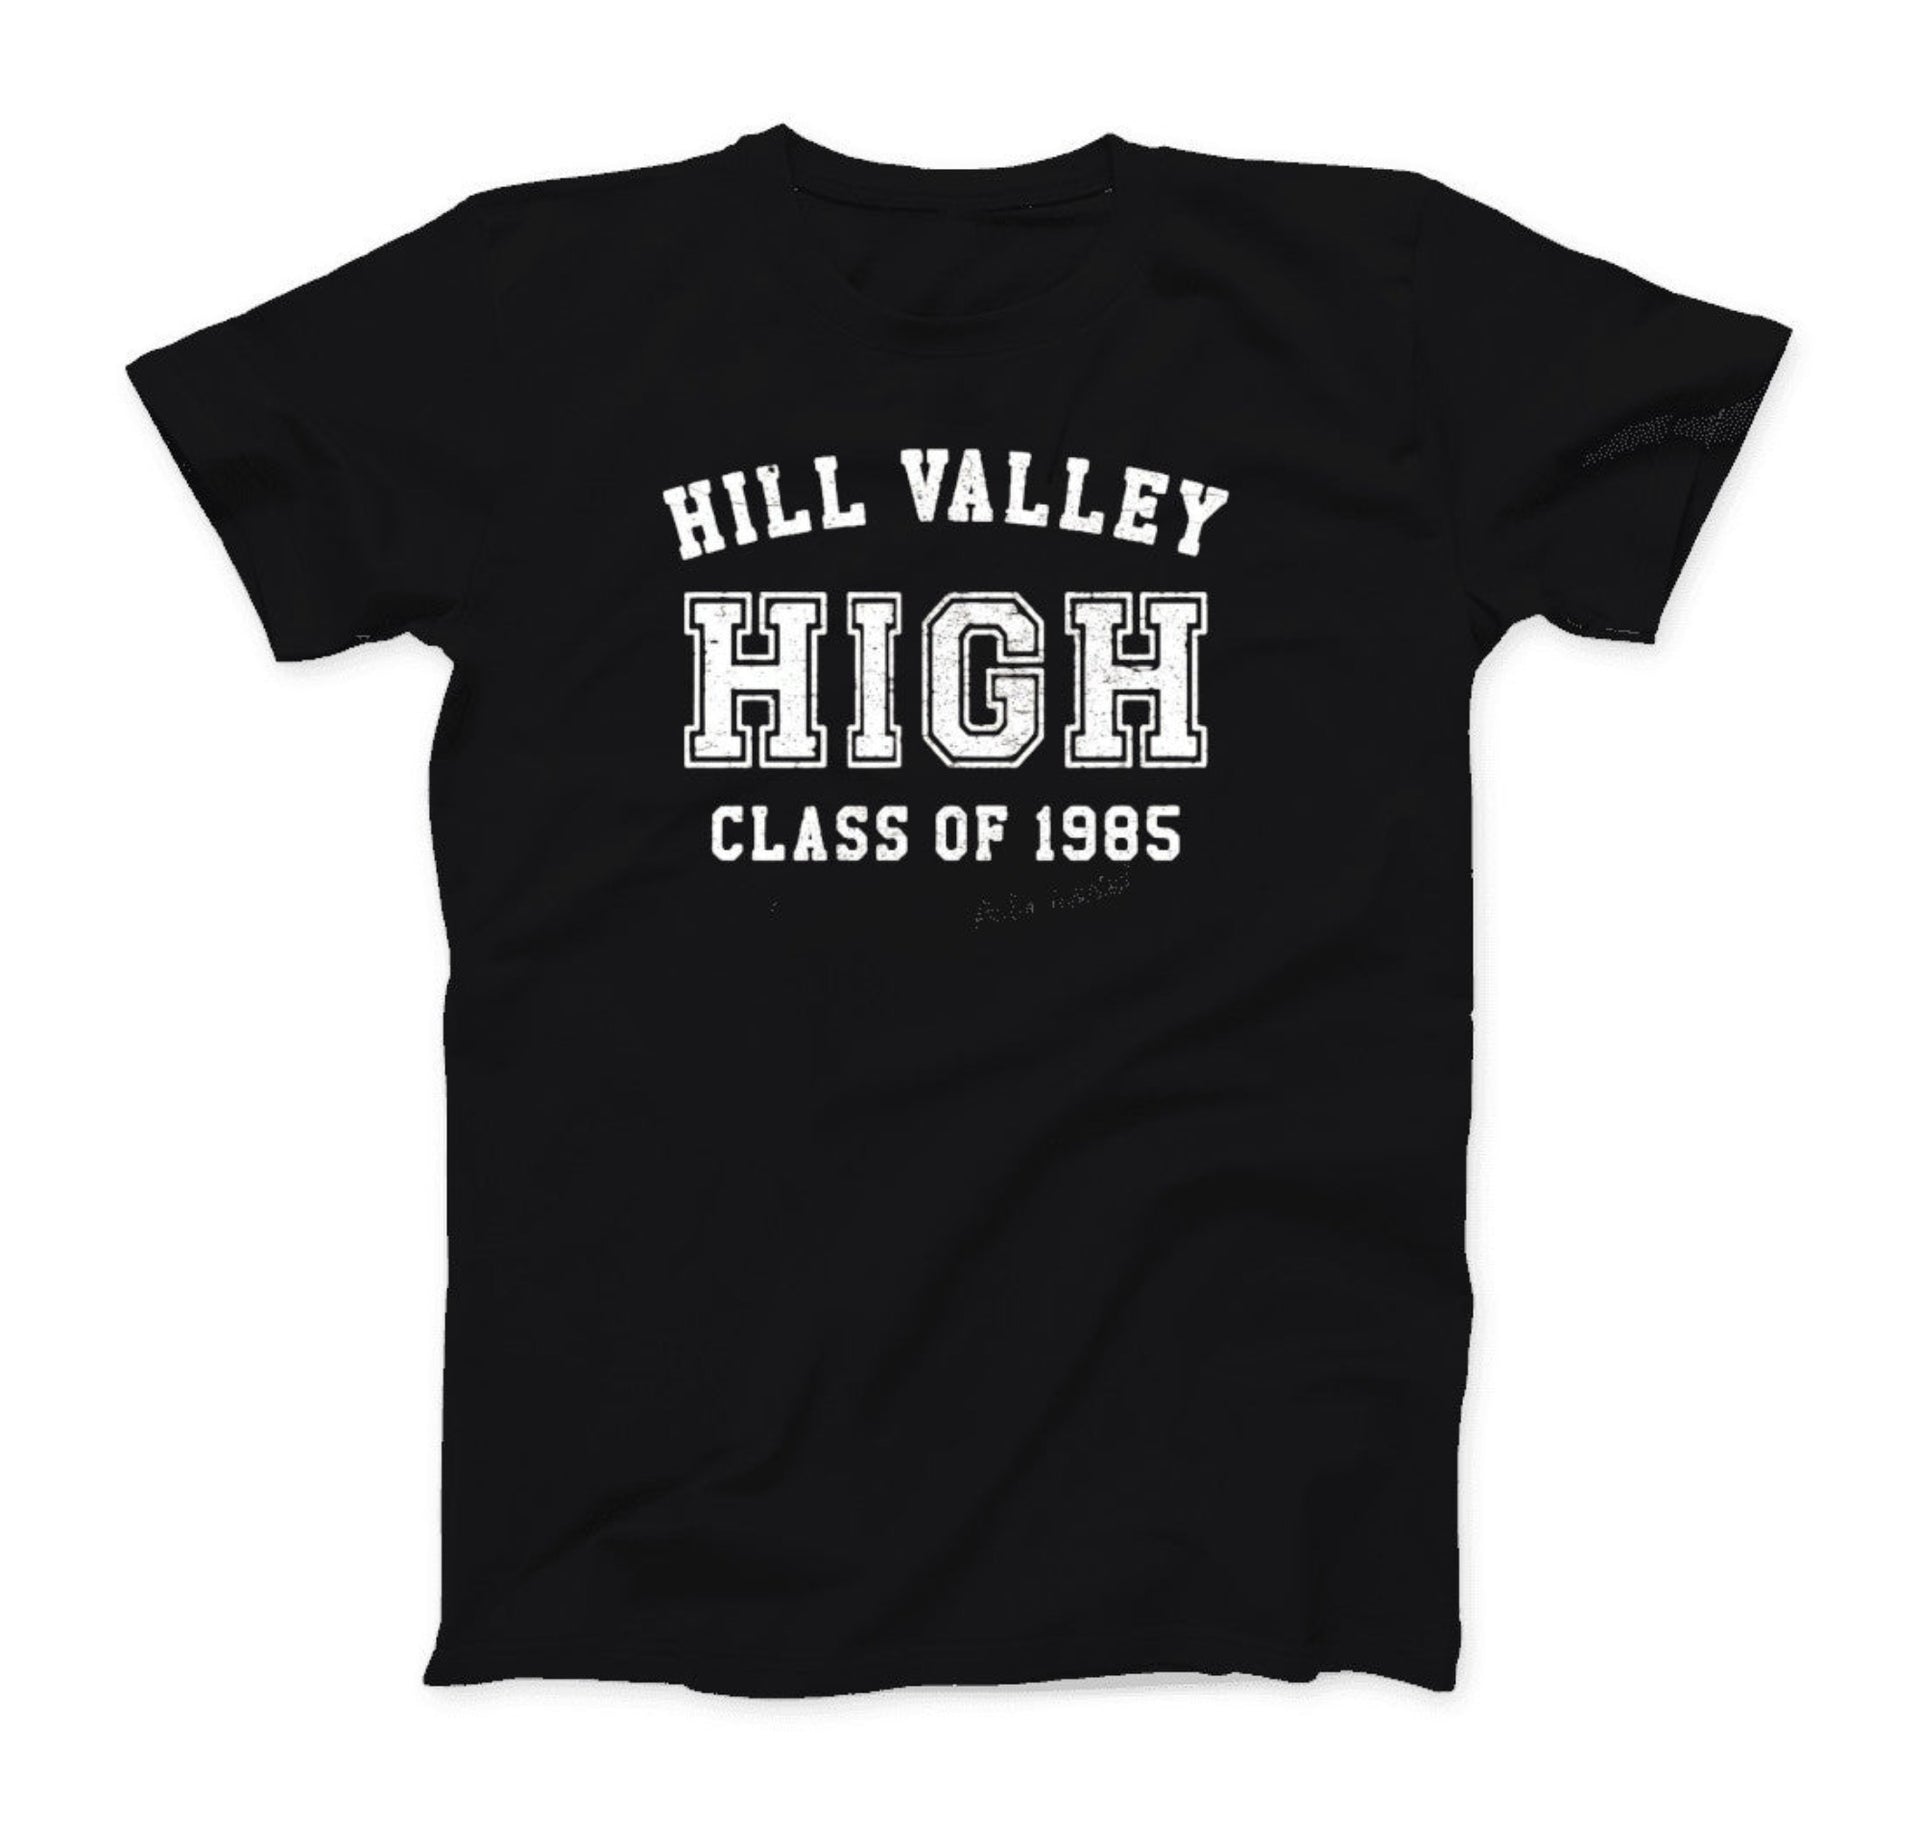 Hill Valley High Class of 1985 - Back to the Future T-Shirt - Clothing - Harvey Ltd